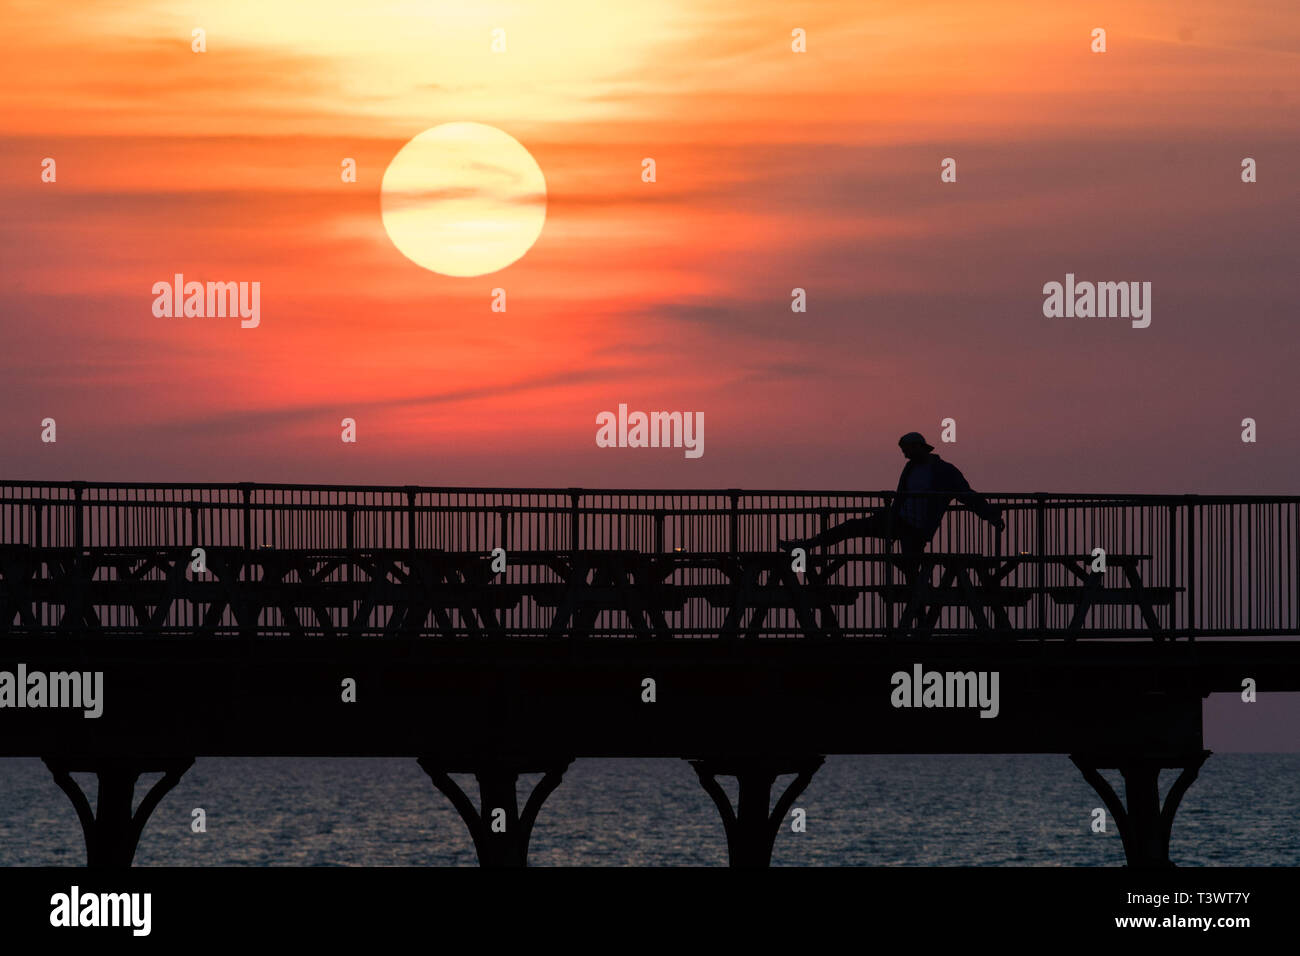 Aberystwyth Wales UK. 11 April 2019. UK Weather: The sun sets as a spectacular golden  globe behind  people silhouetted as they stand at the end of the pier in Aberystwyth on the Cardigan Bay coast of west Wales. Credit: Keith Morris/Alamy Live News Stock Photo